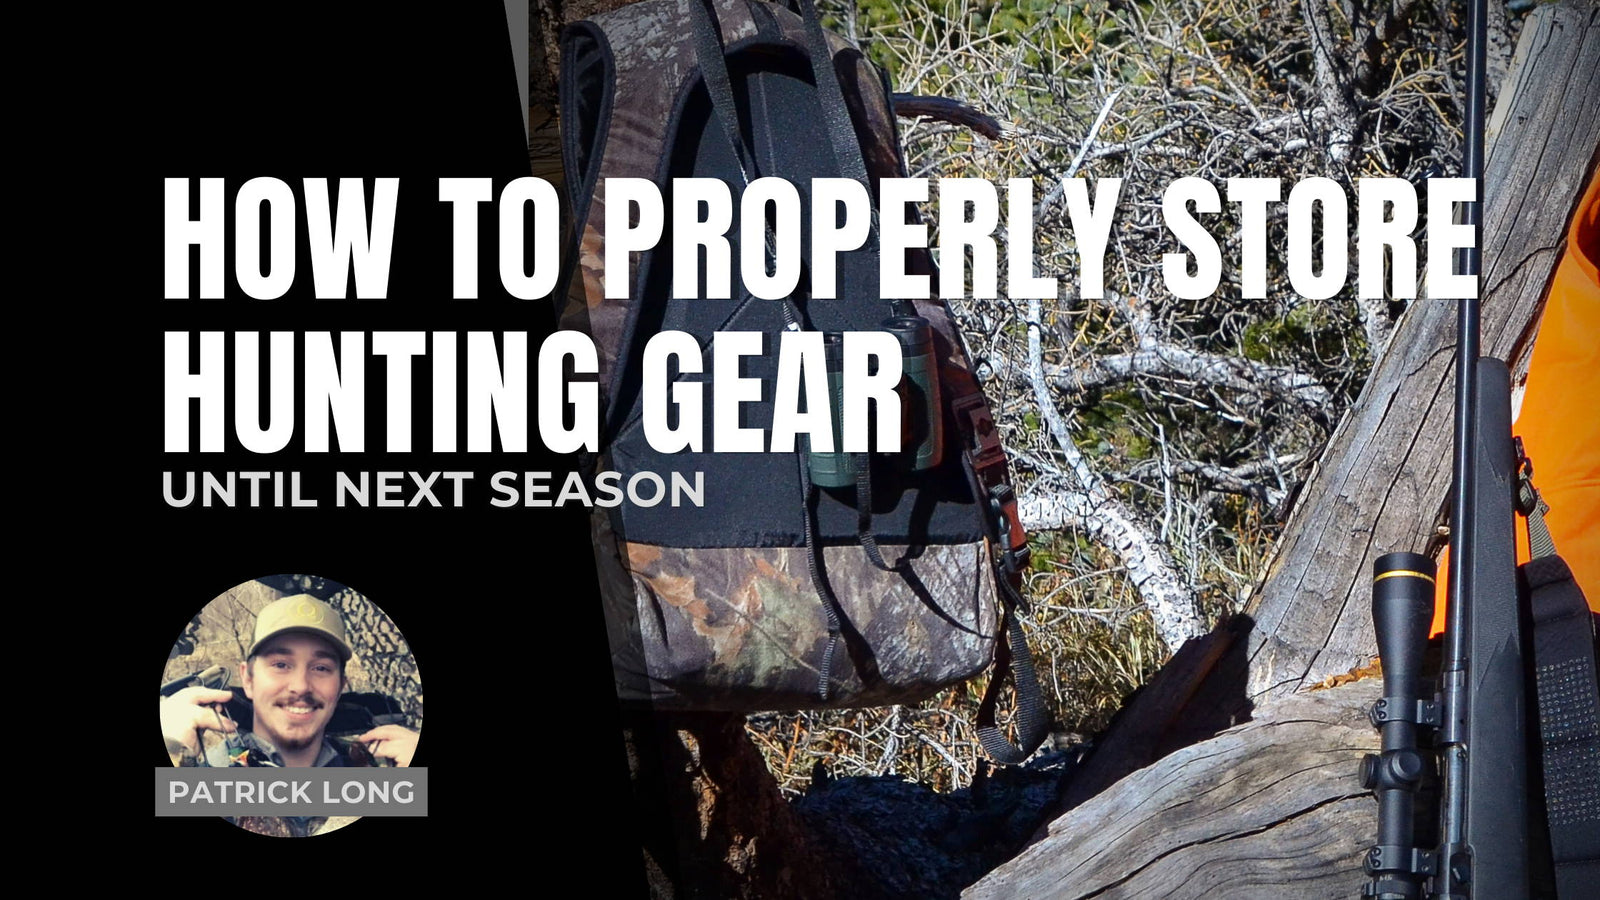 How To Properly Store Hunting Gear Until Next Season